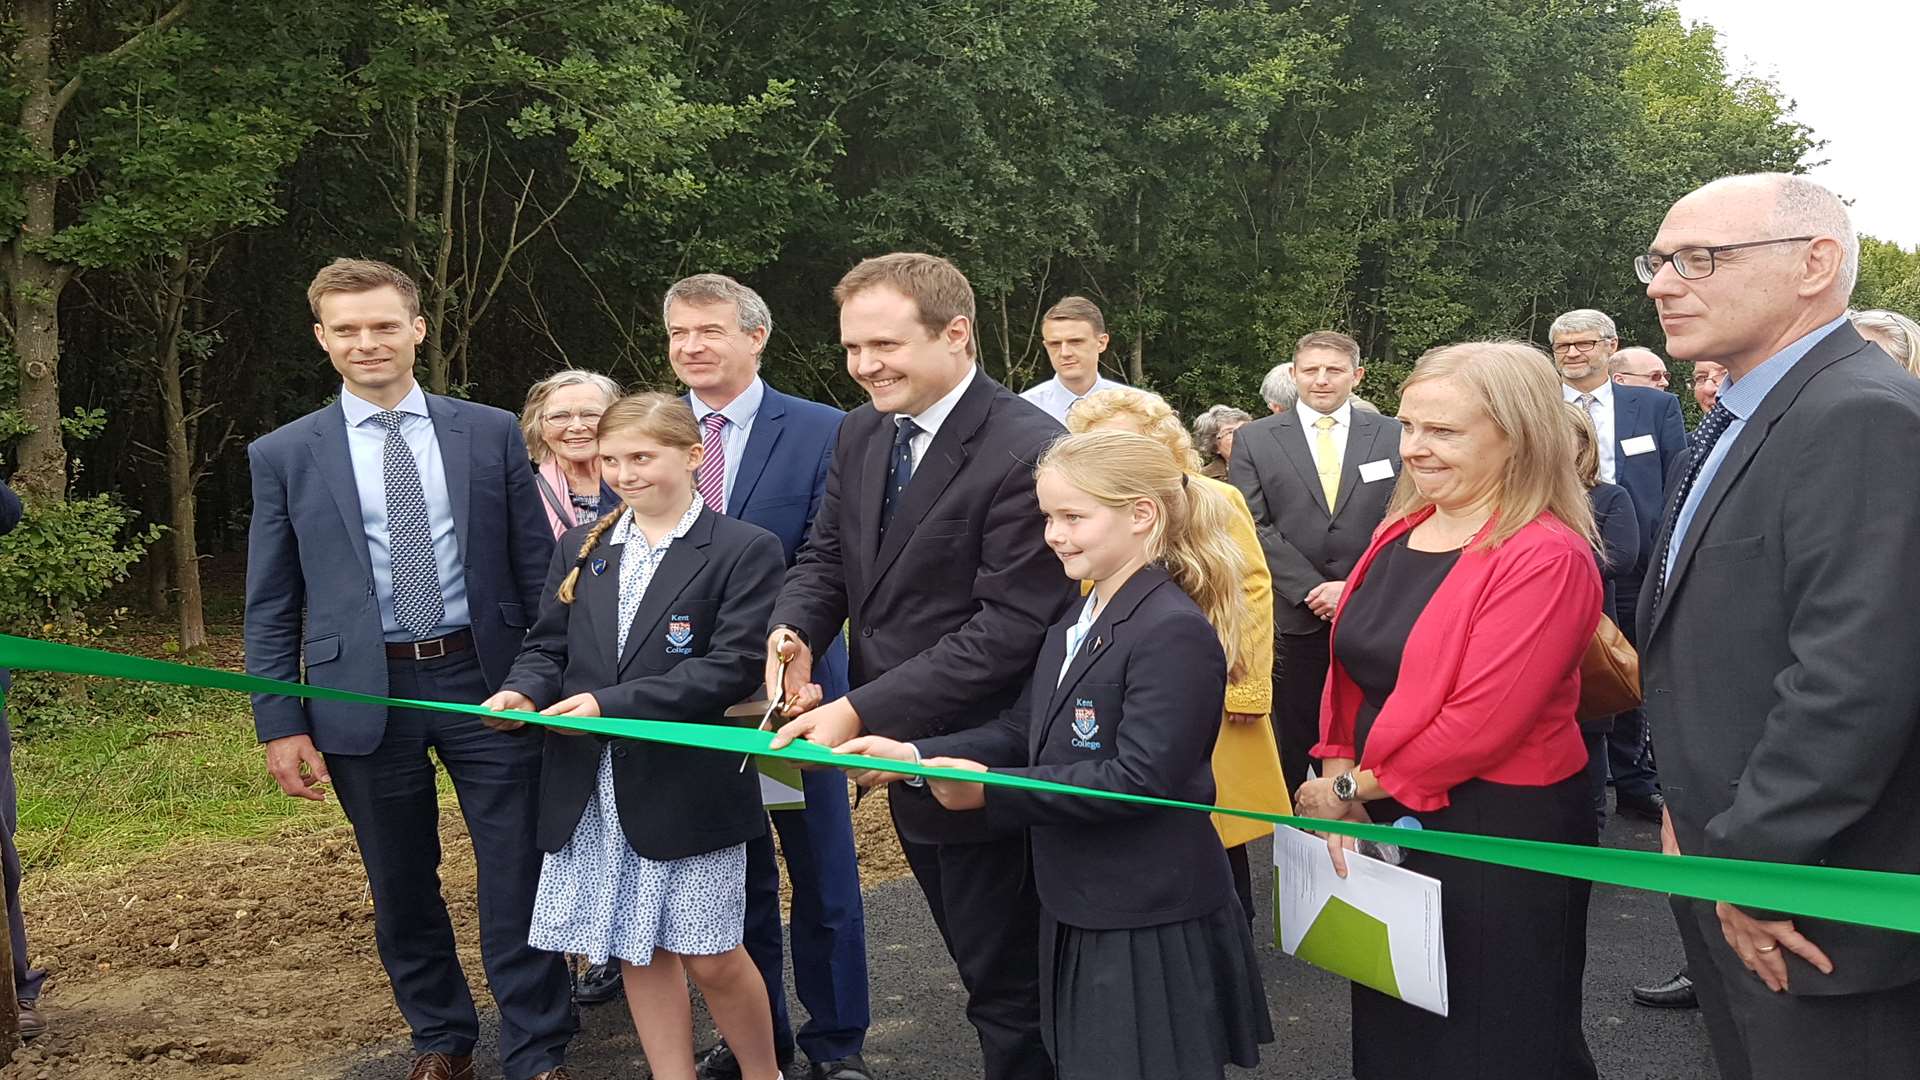 Tom Tugendhat, MP for Tonbridge and Malling, officially opened the new dual carriageway